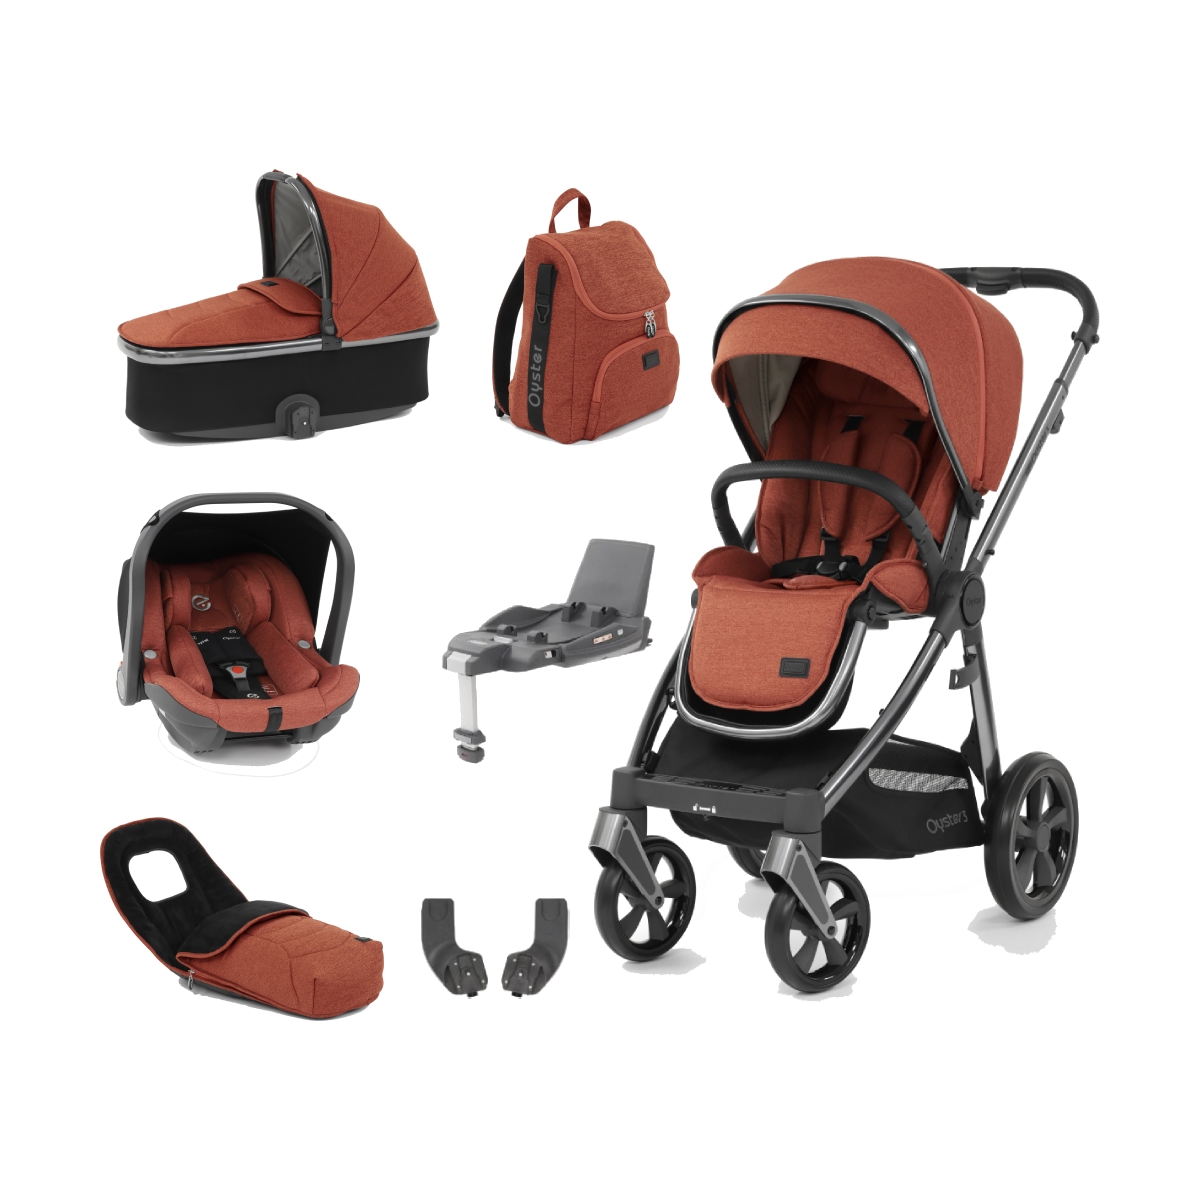 BabyStyle Oyster 3 City Grey Finish Edition 7 Piece Luxury Travel System